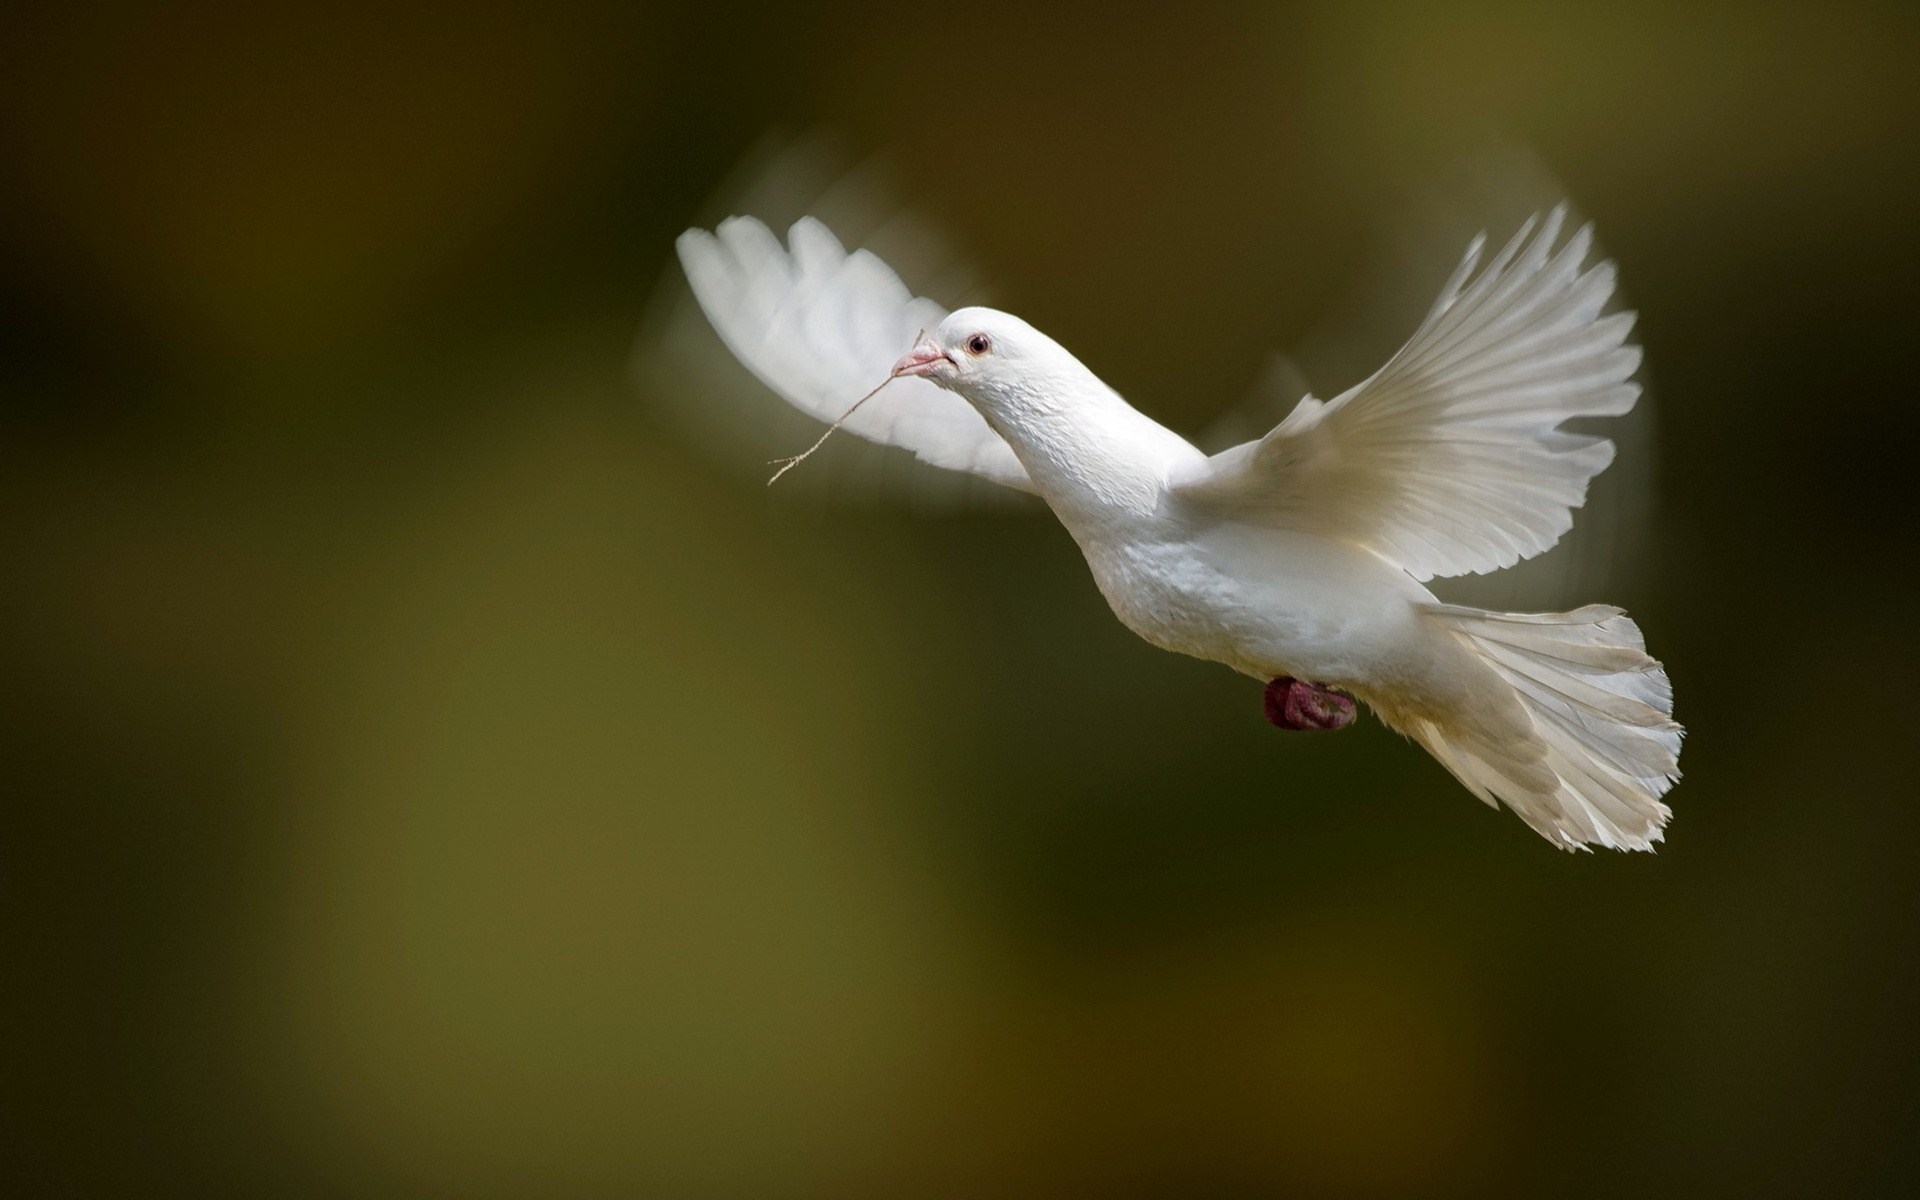 Flying white dove hd wallpaper download